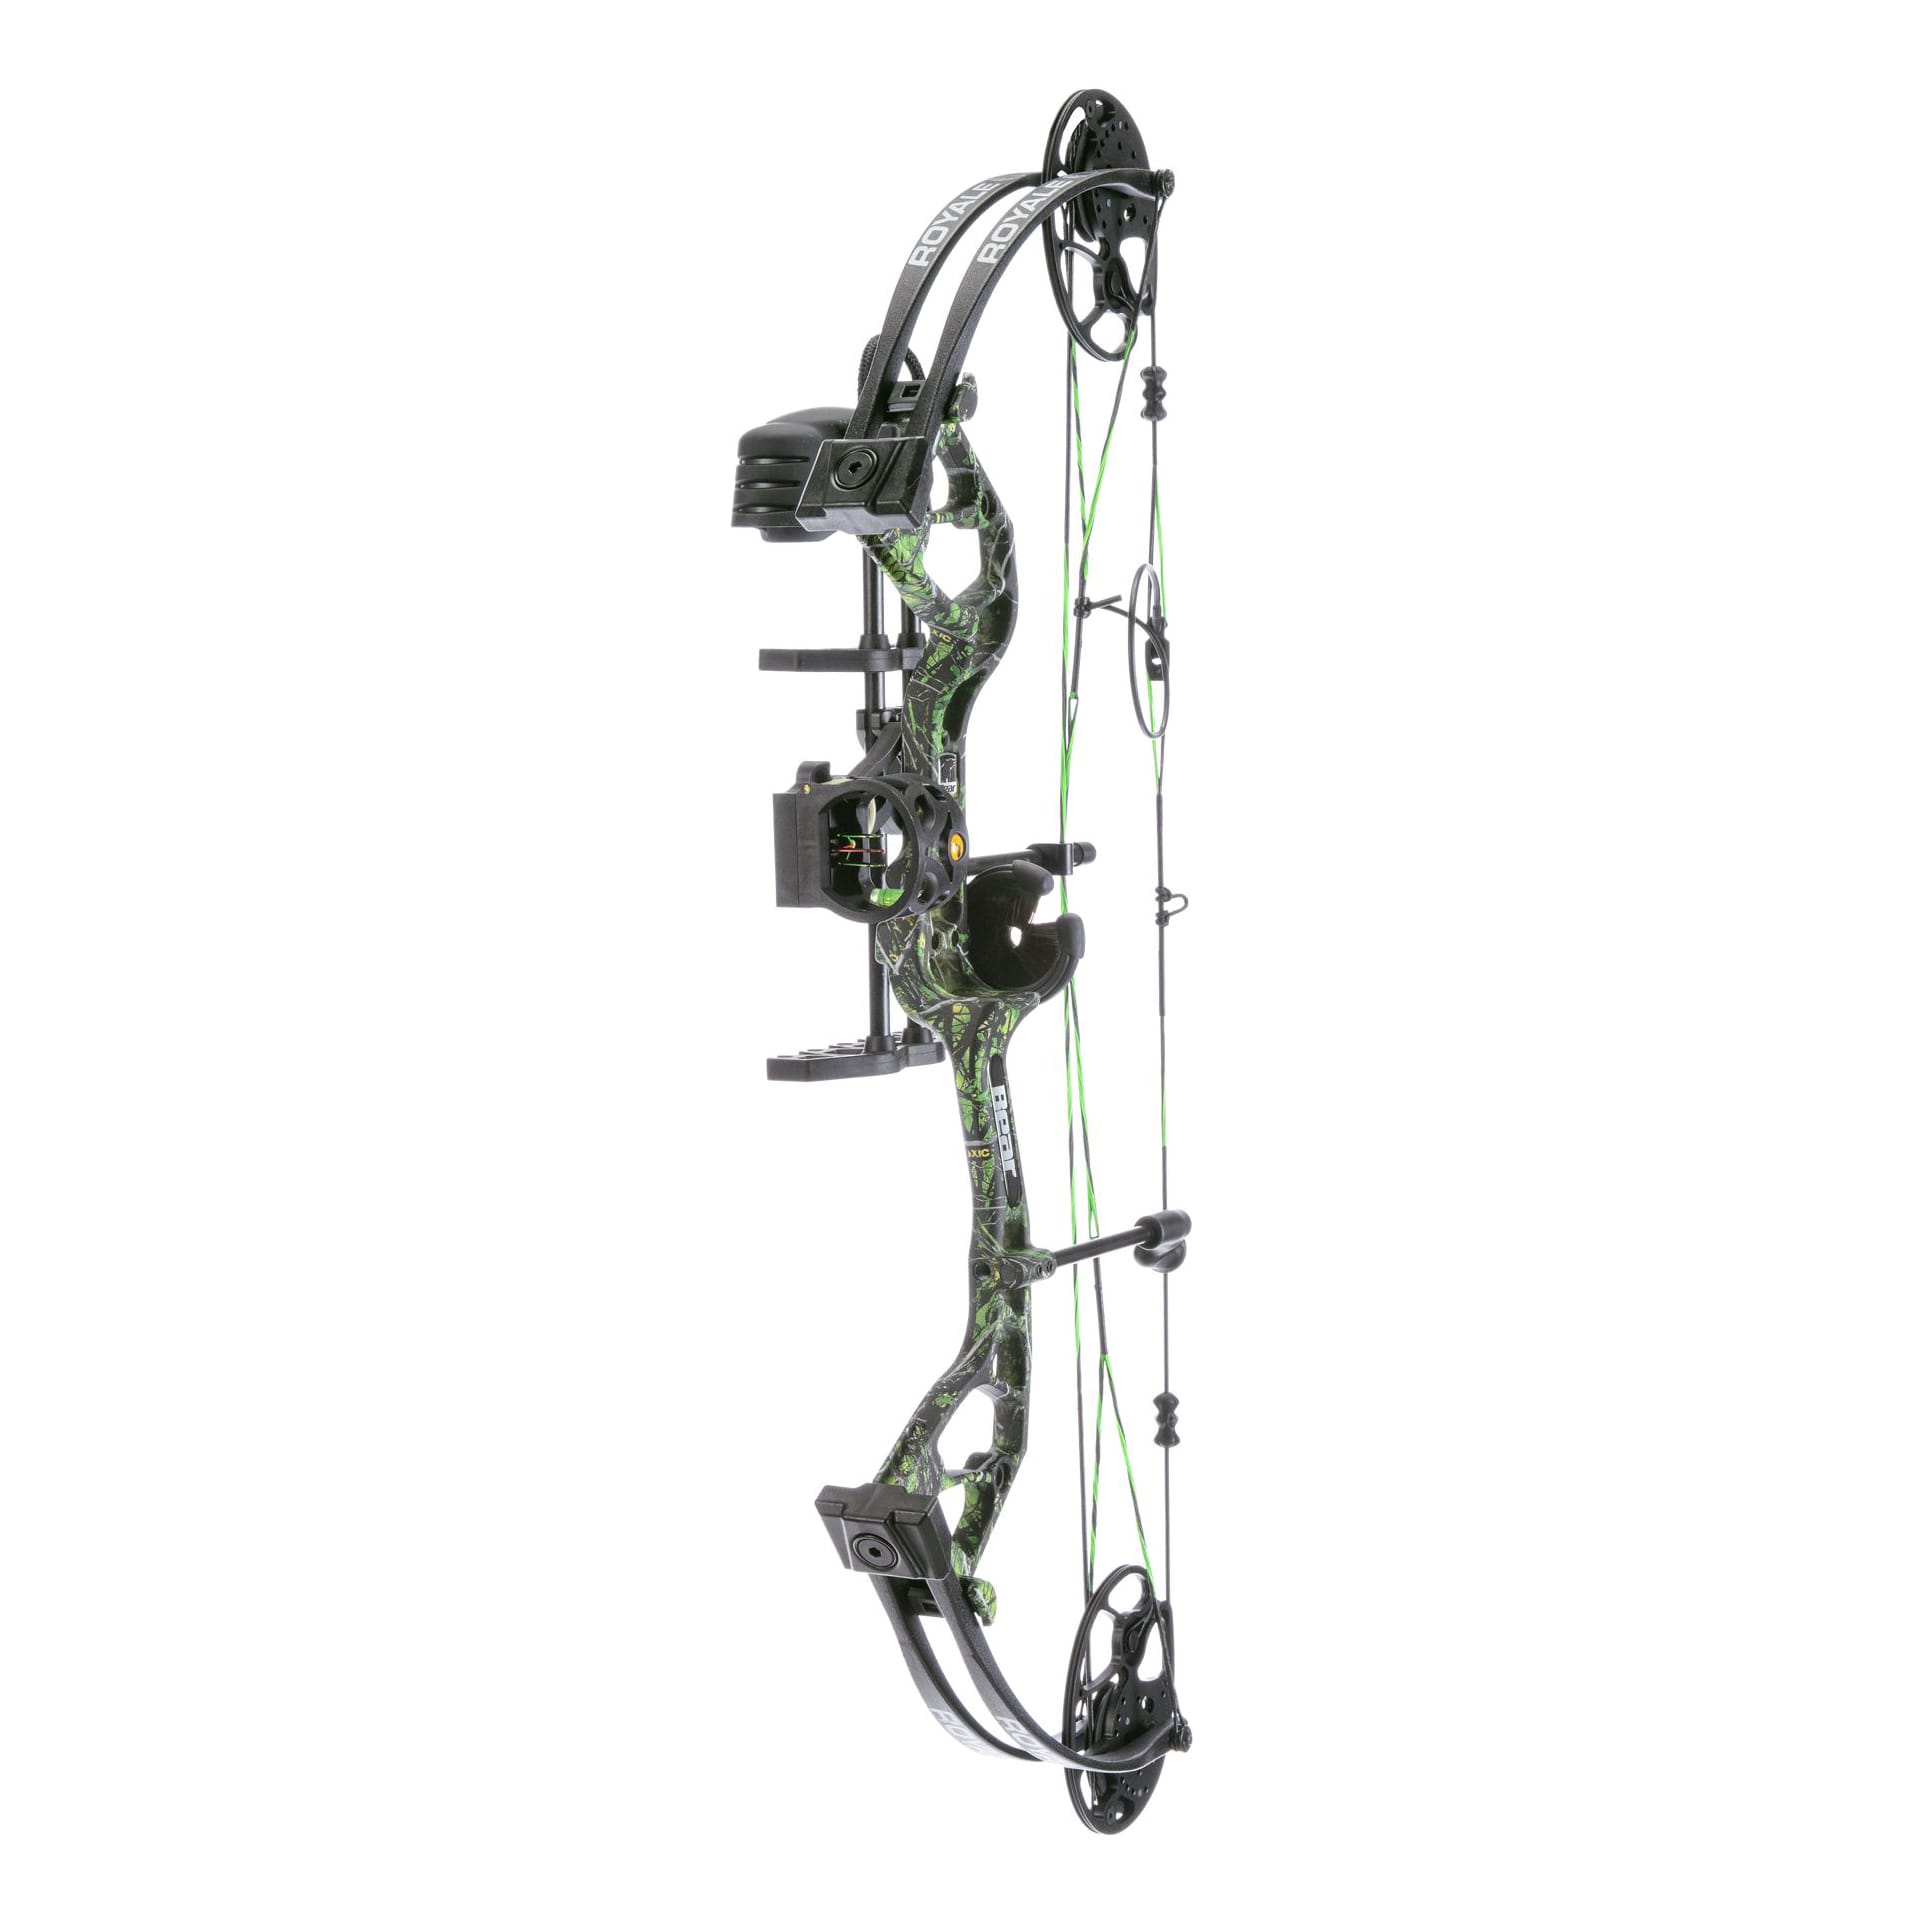 Bear® Archery Royale RTH Compound Bow Package - Toxic Camo,Bear® Archery Royale RTH Compound Bow Package - Toxic Camo